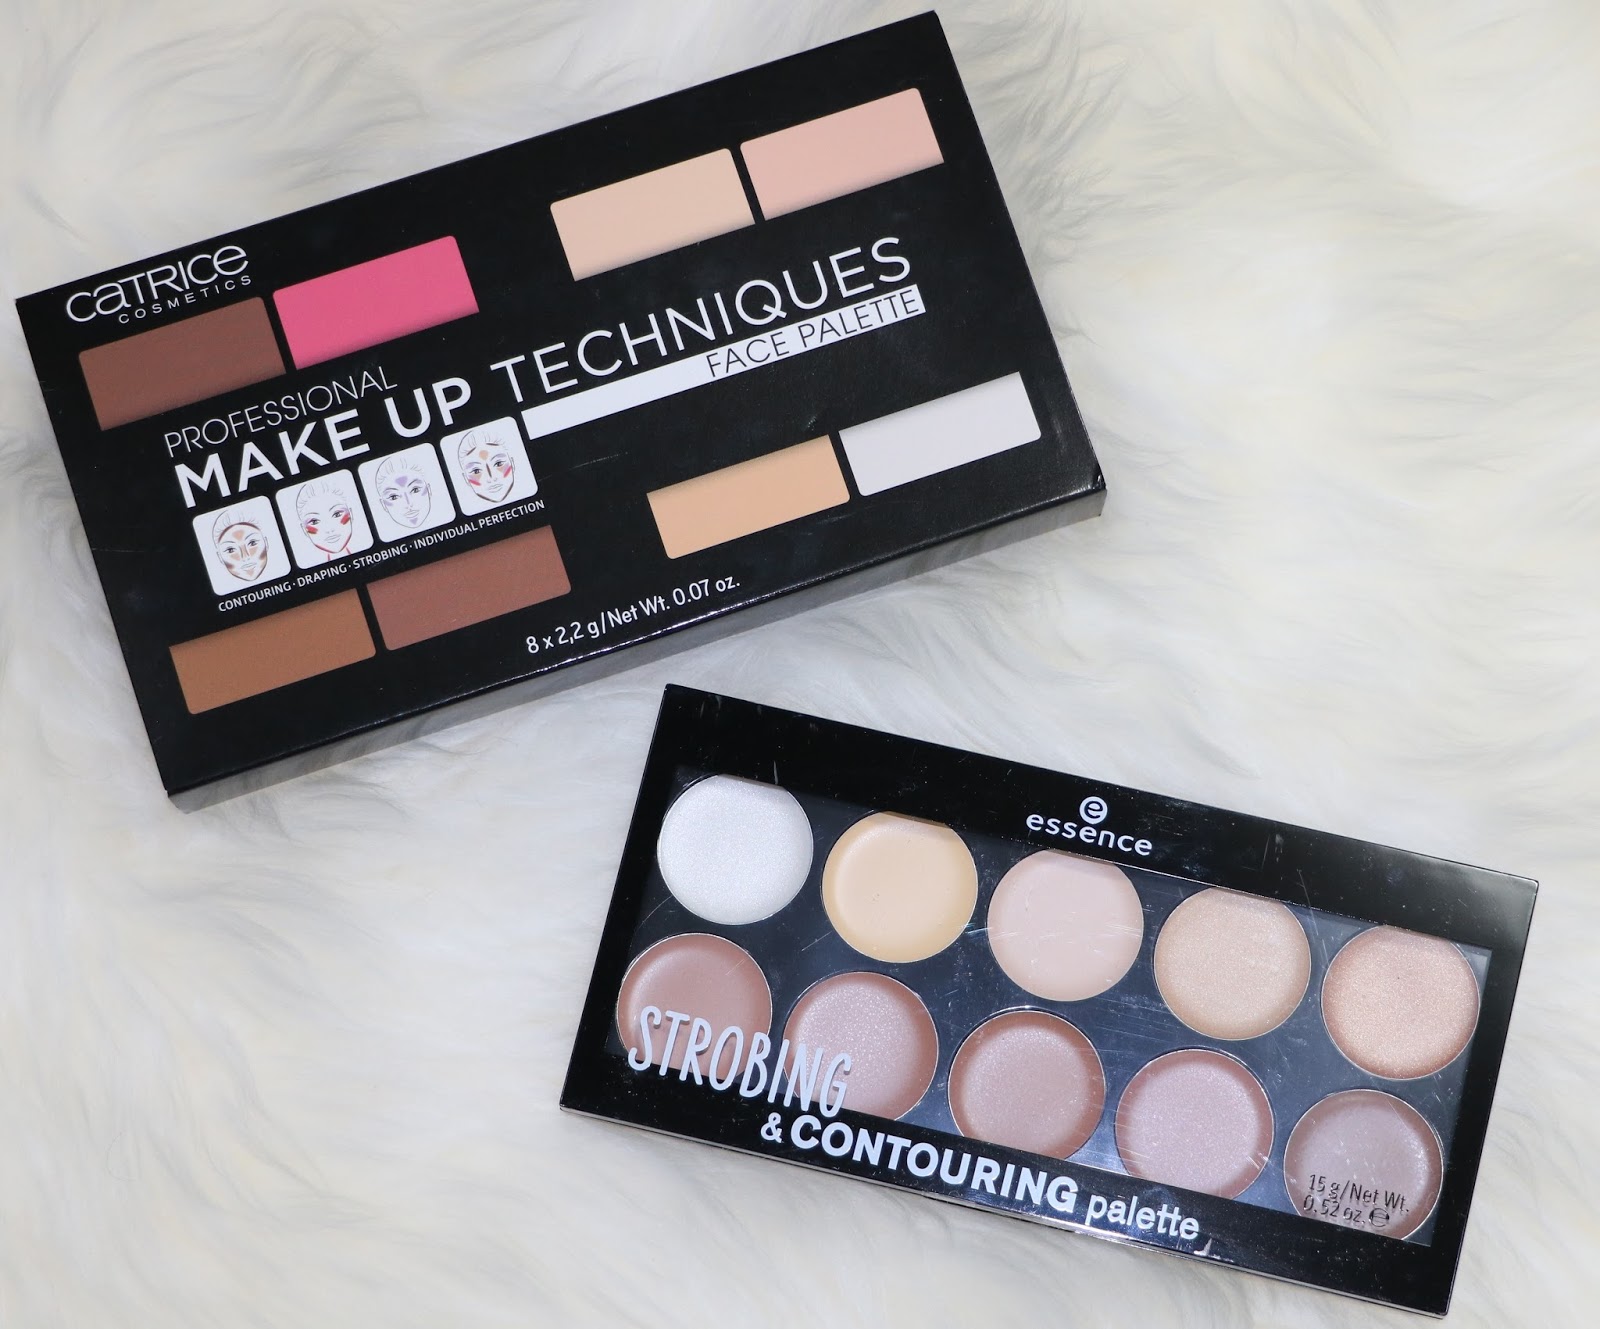 Battle of the Brands | Catrice Professional Make Up Techniques Face Palette  vs Essence Strobing & Contouring Palette - Lara\'s Pint of Style